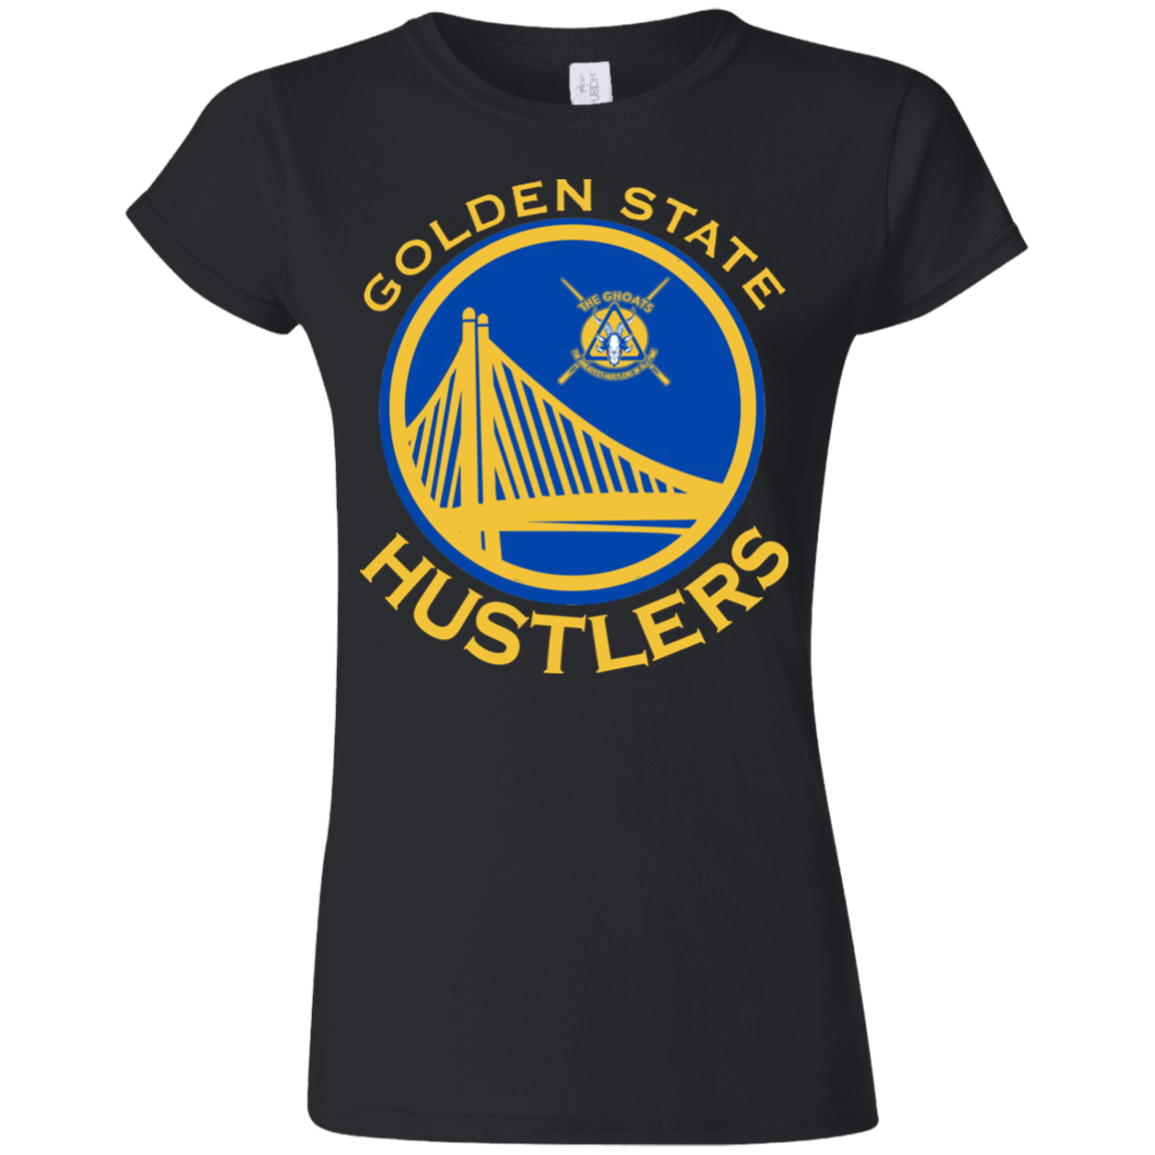 The GHOATS Custom Design. #12 GOLDEN STATE HUSTLERS.	Ultra Soft Style Ladies' T-Shirt